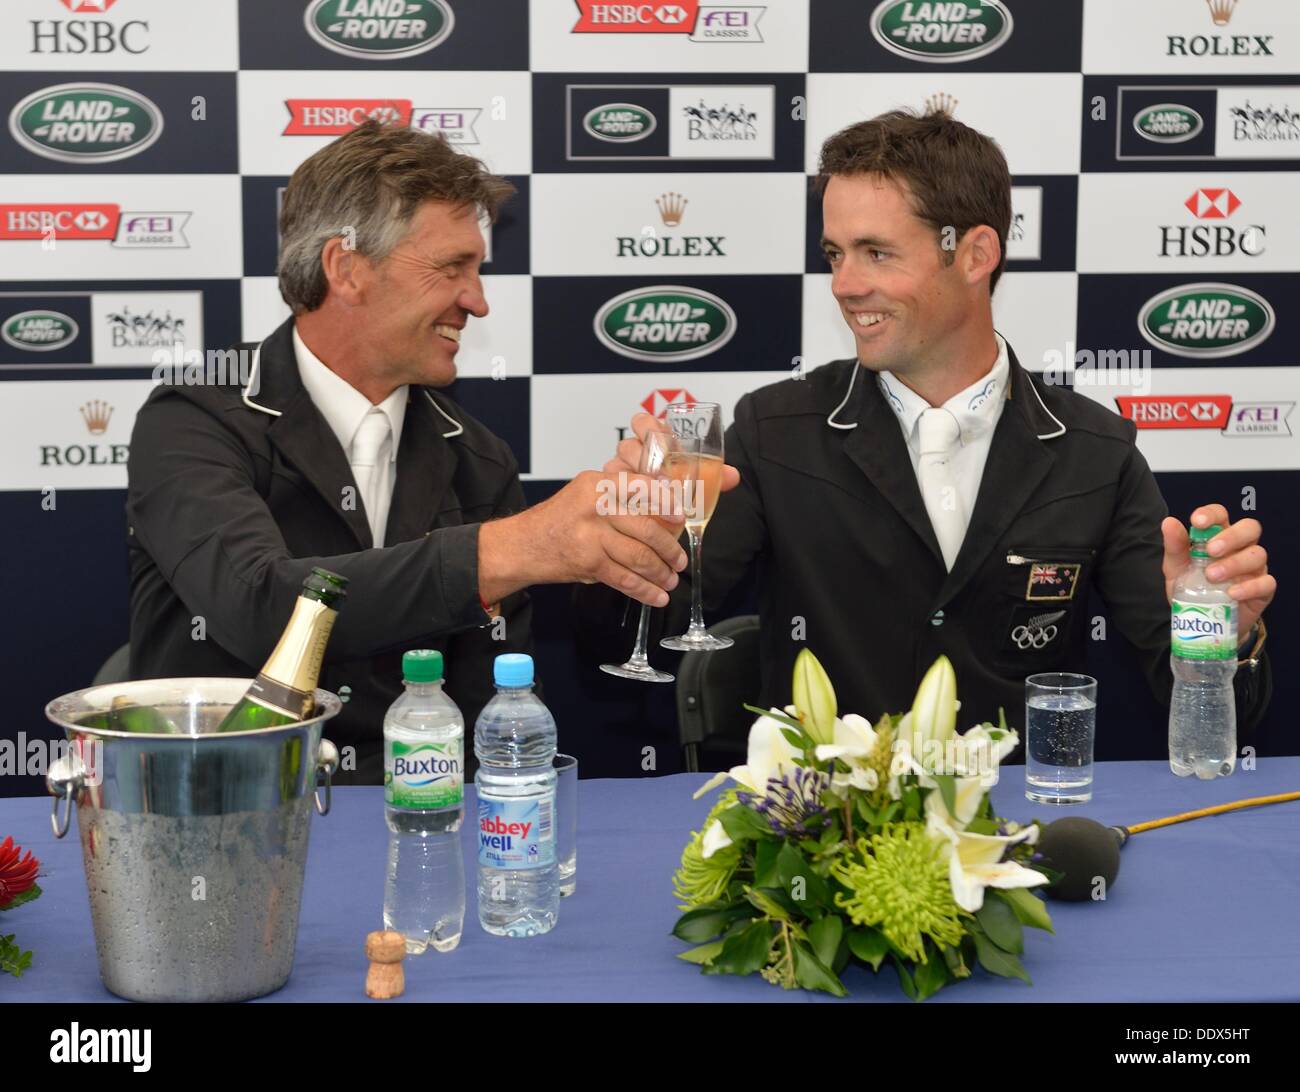 Stamford, UK. 8th Sep, 2013. Andrew Nicholson [NZL] toasts Jonathan Paget [NZL] on winning The 2013 Land Rover Burghley Horse Trials.  Jonathan Paget followed up his win at Badminton earlier in the year with a second four start event win riding the same horse, CLIFTON PROMISE. The combination won the event on a total score of 41.1.  The Land Rover Burghley Horse Trials take place between 5th - 8th September at Burghley House, Stamford.  Credit:  Stephen Bartholomew/Alamy Live News Stock Photo